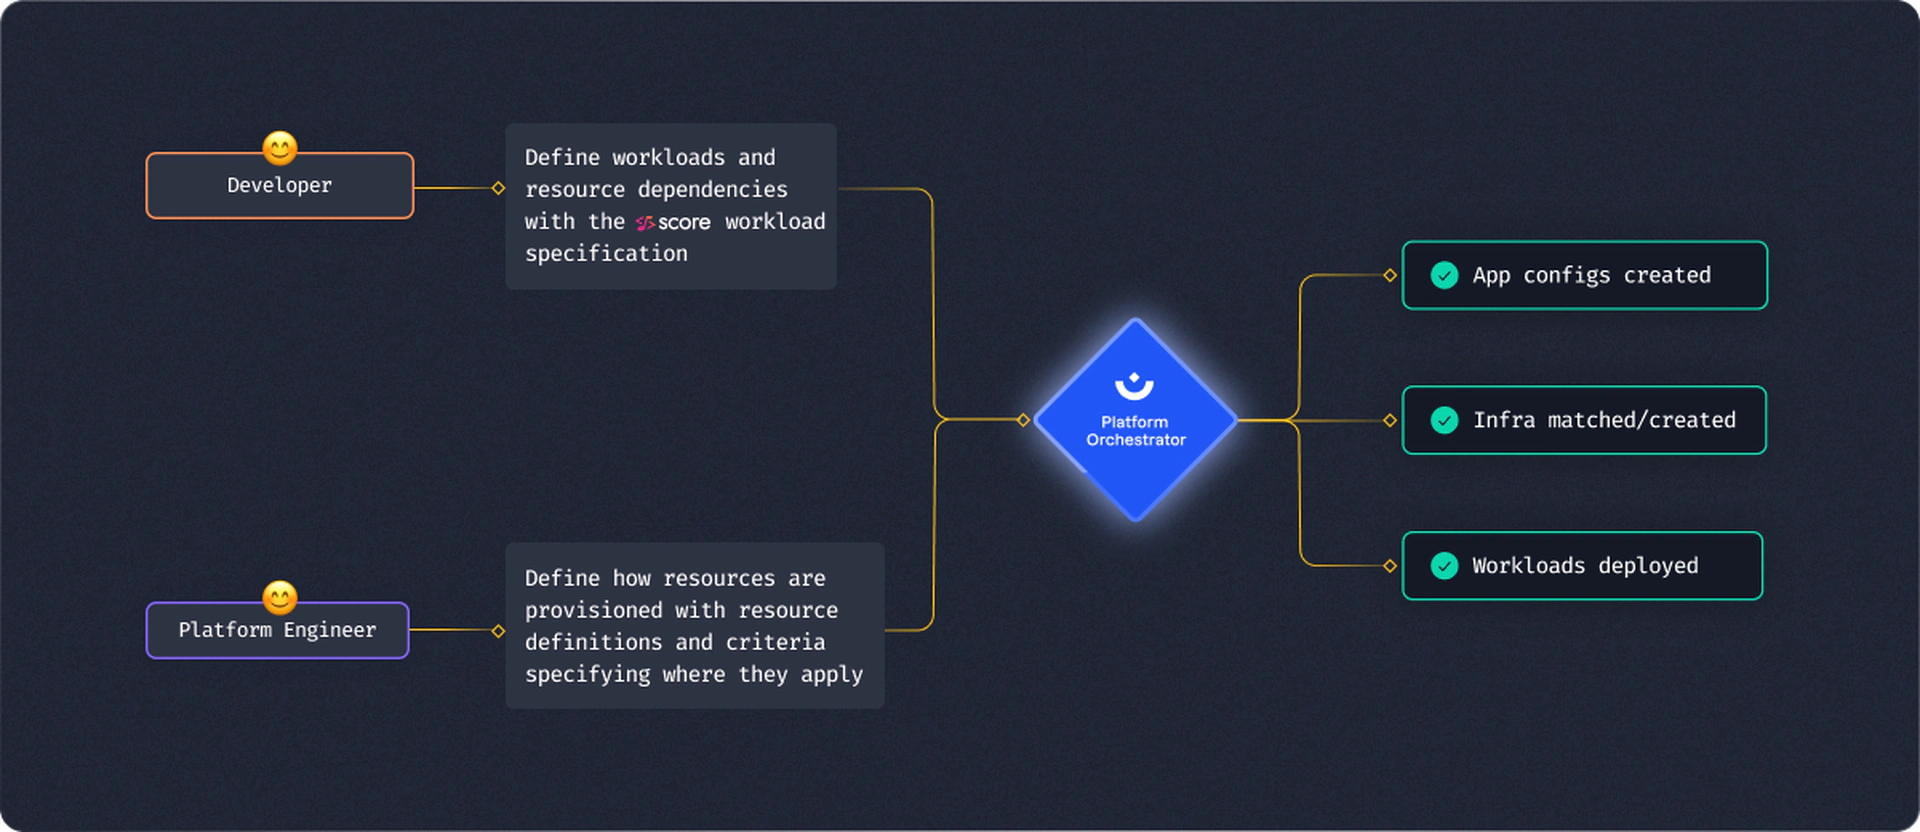 Overview of the Platform Orchestrator